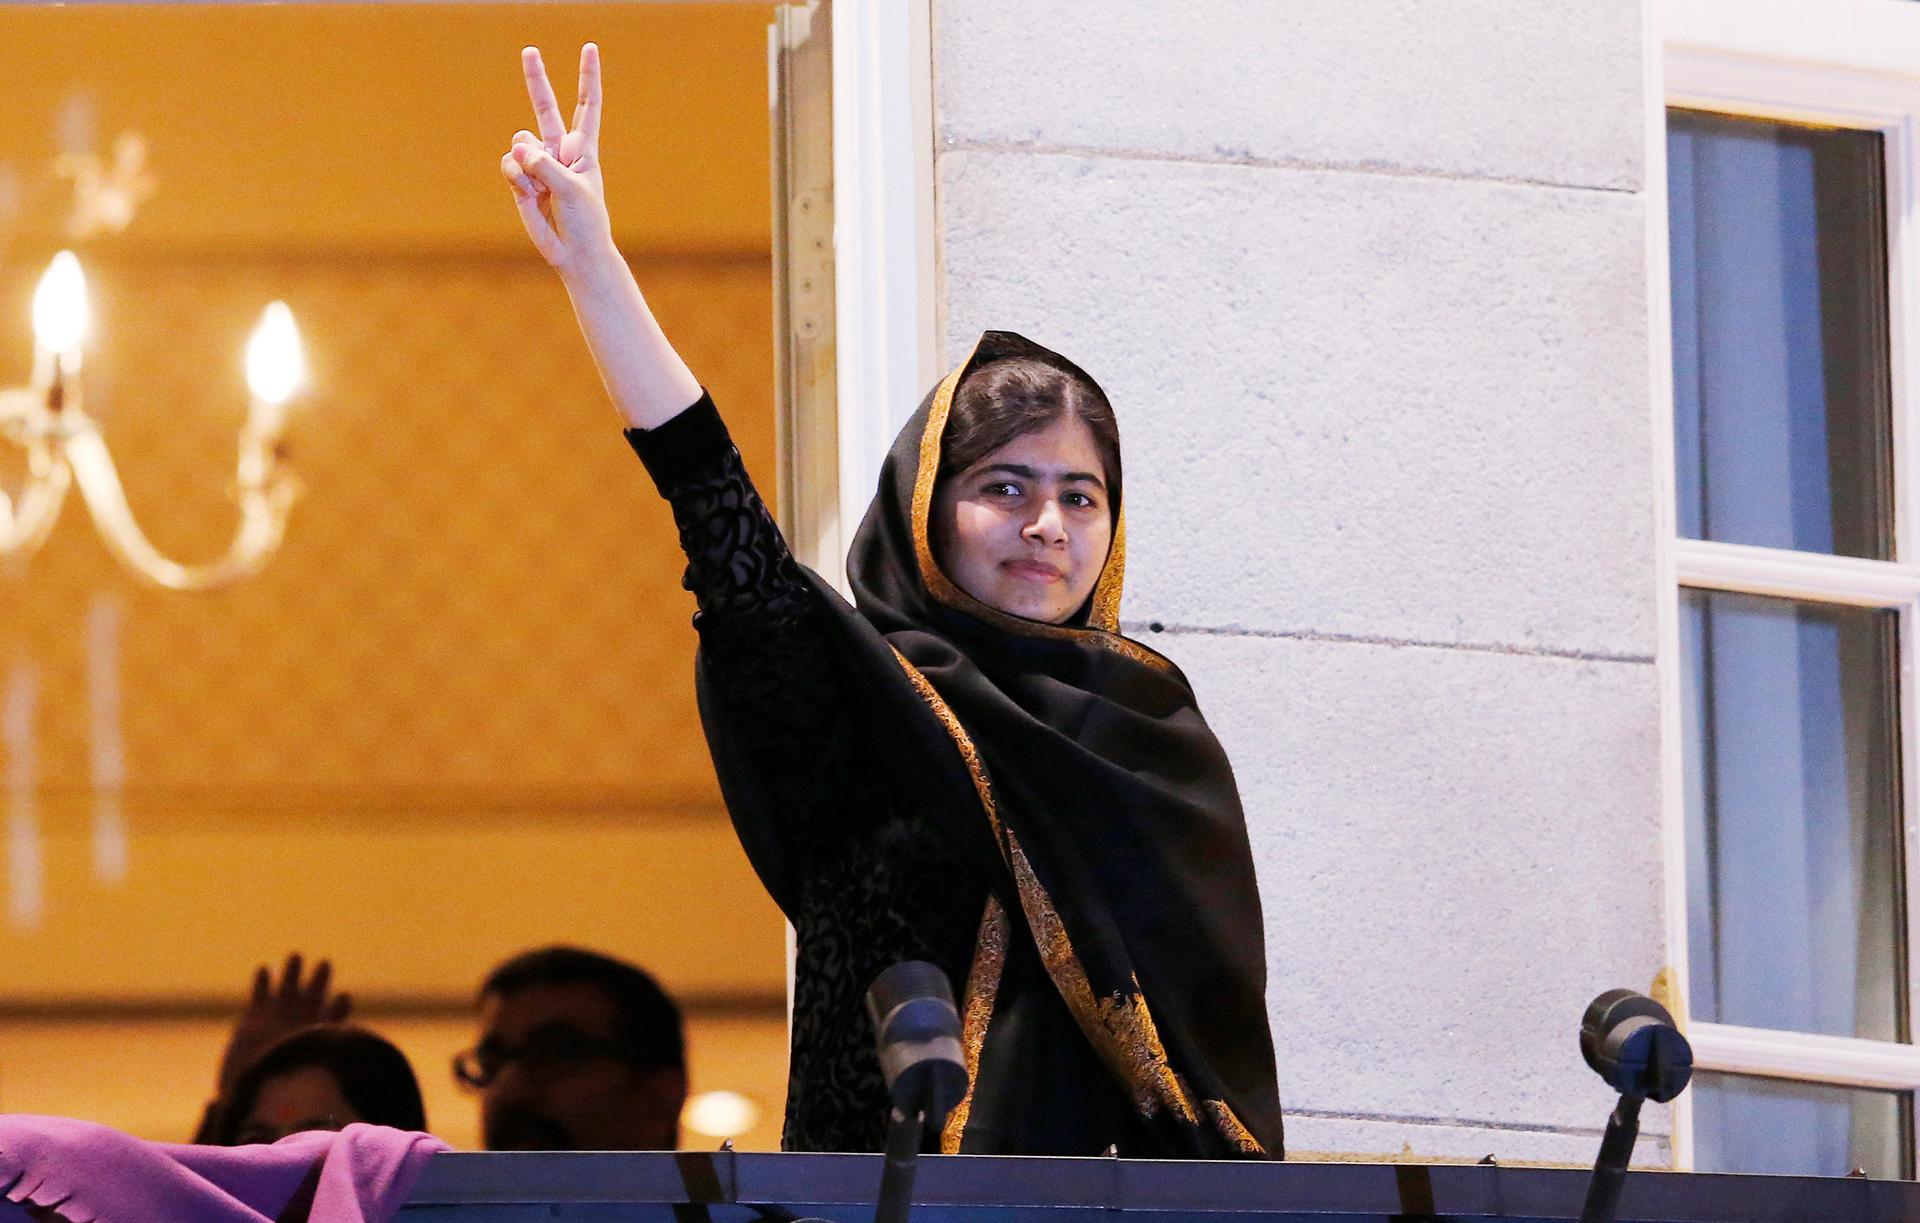 Nobel Peace Prize winner Malala Yousafzai flashes the peace sign from the balcony of the Grand Hotel in Oslo on December 10, 2014.